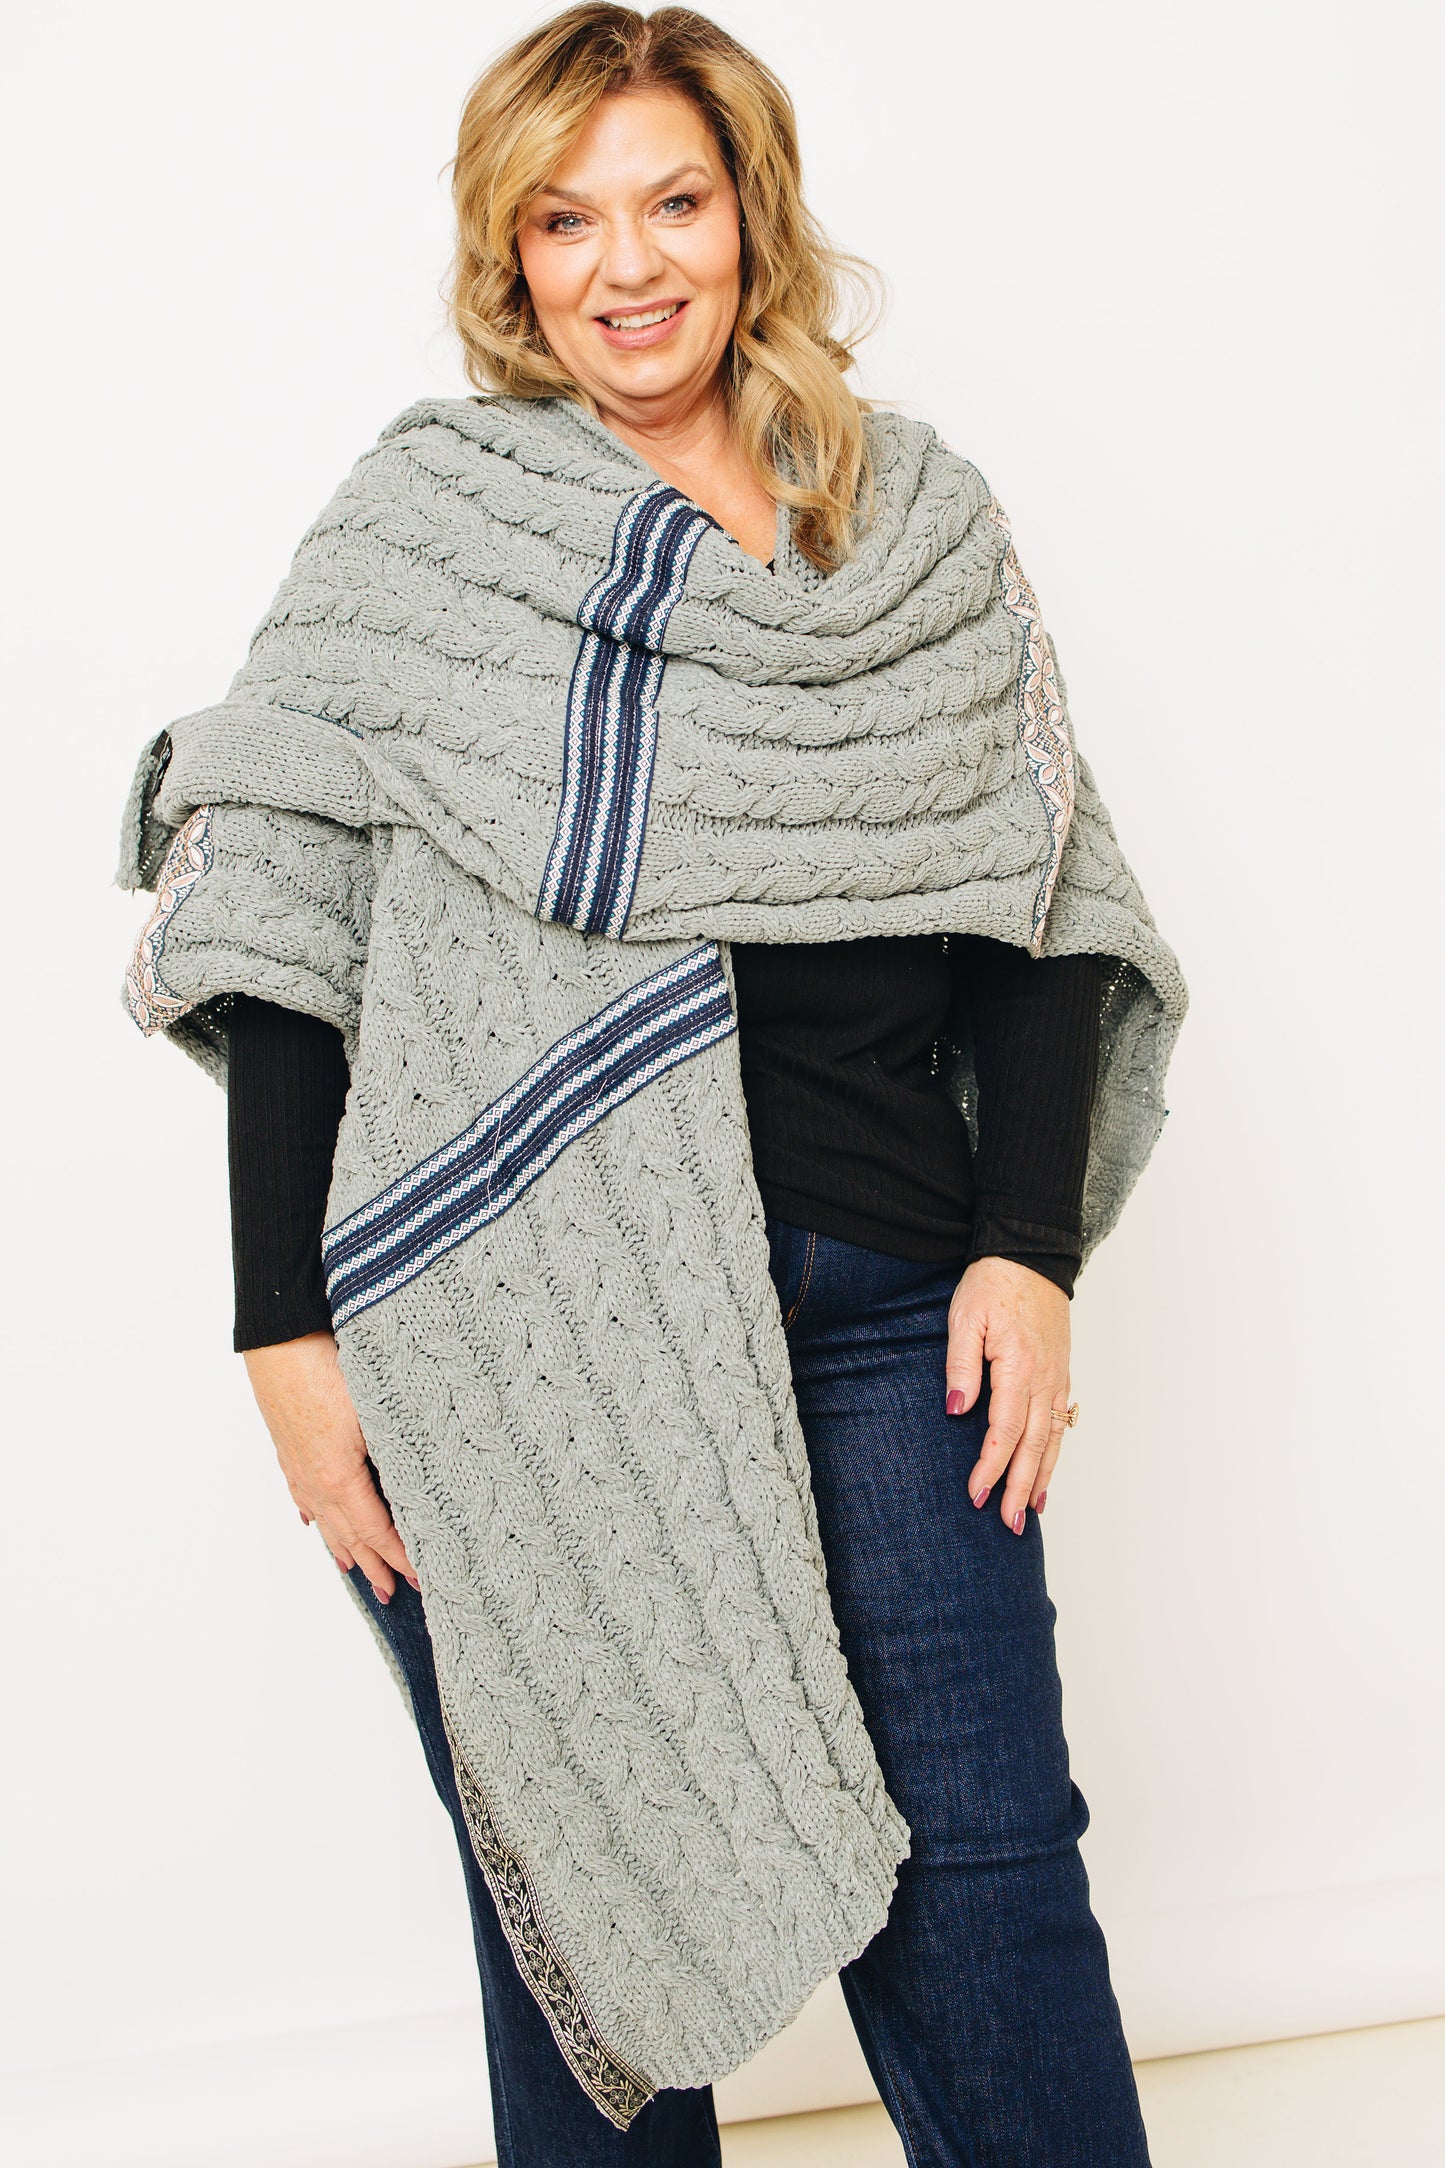 Pol - Whispering Wind Woven Poncho (S-2XL)